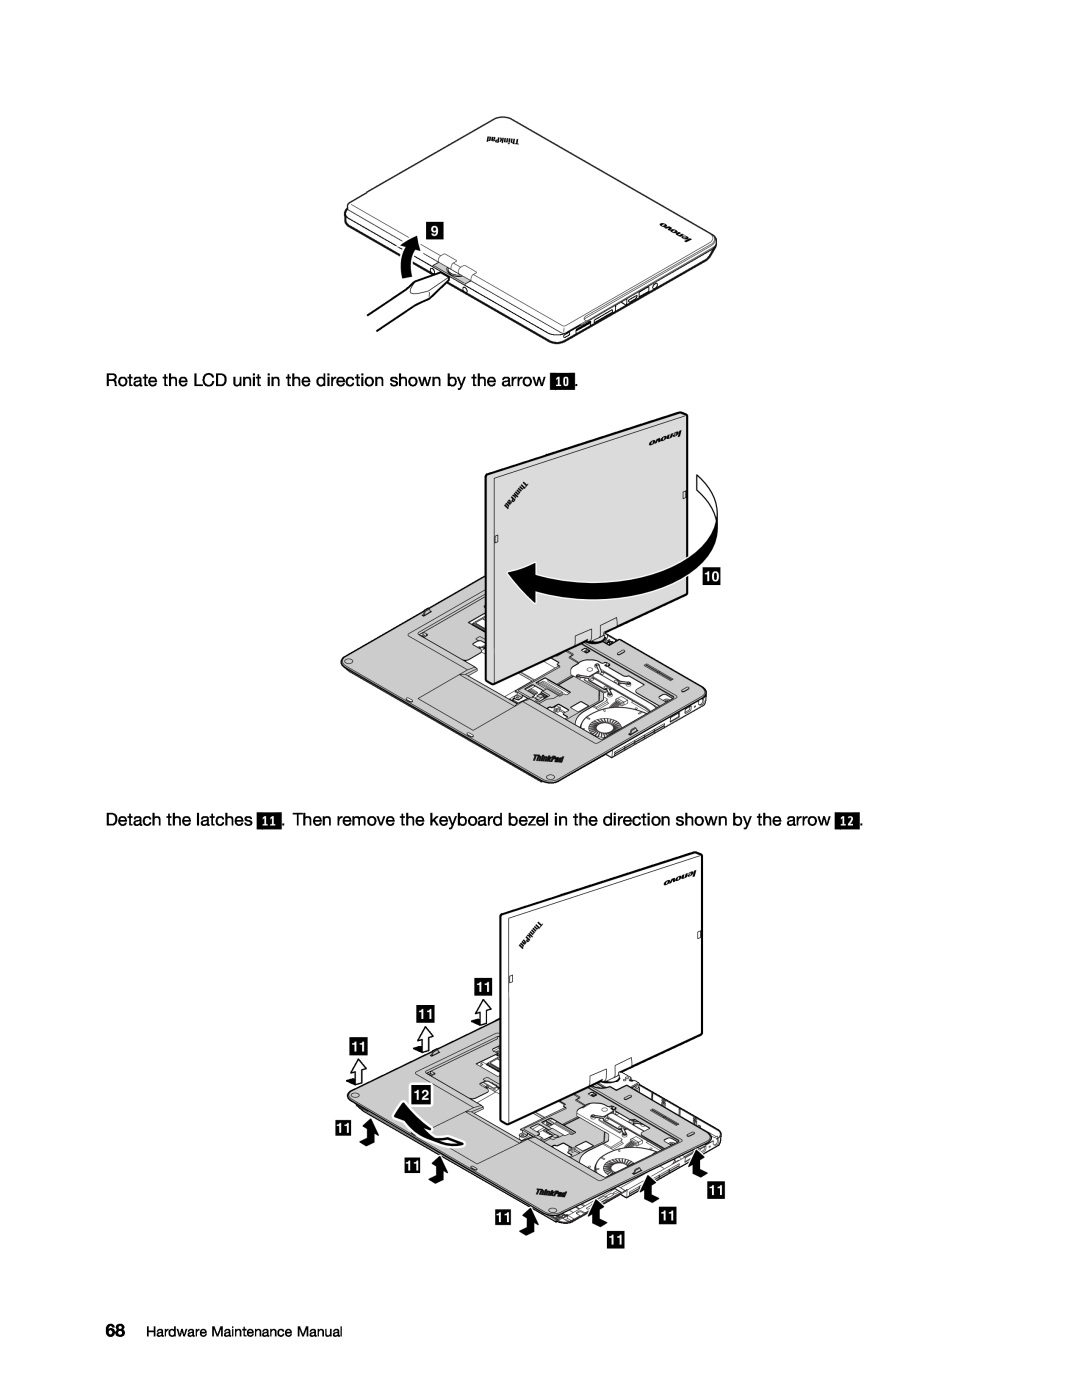 Lenovo S230U, 33472YU manual Rotate the LCD unit in the direction shown by the arrow, Hardware Maintenance Manual 